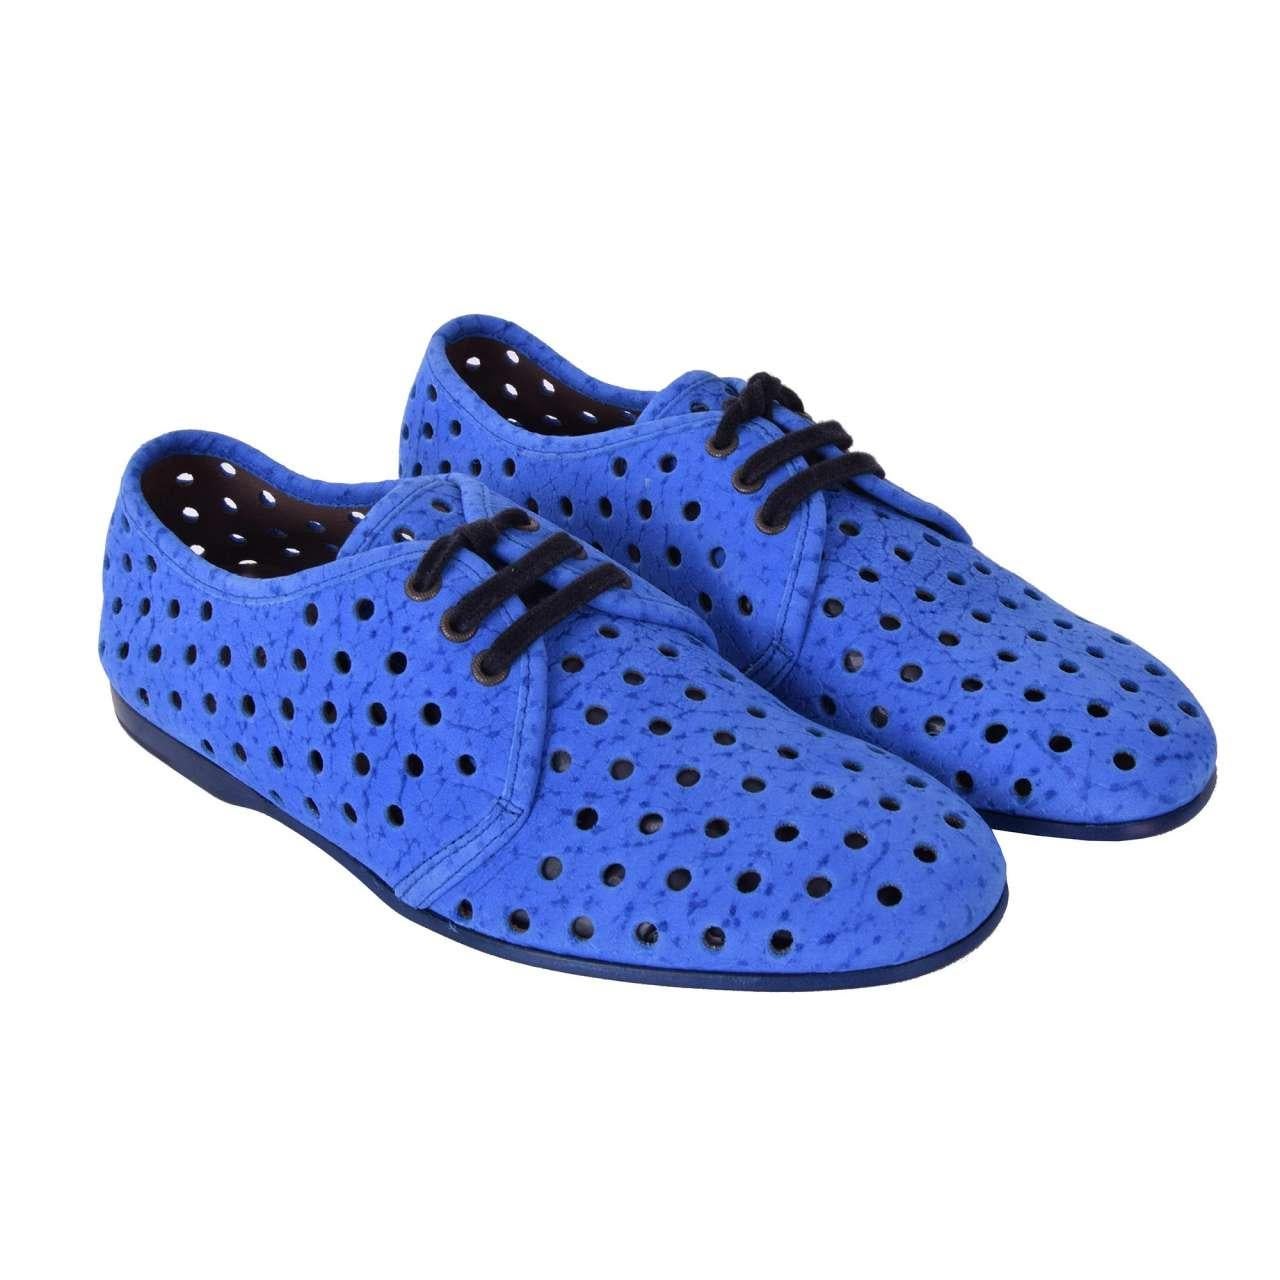 Men's Dolce & Gabbana - Perforated Shoes AMALFI Blue EUR 39 For Sale